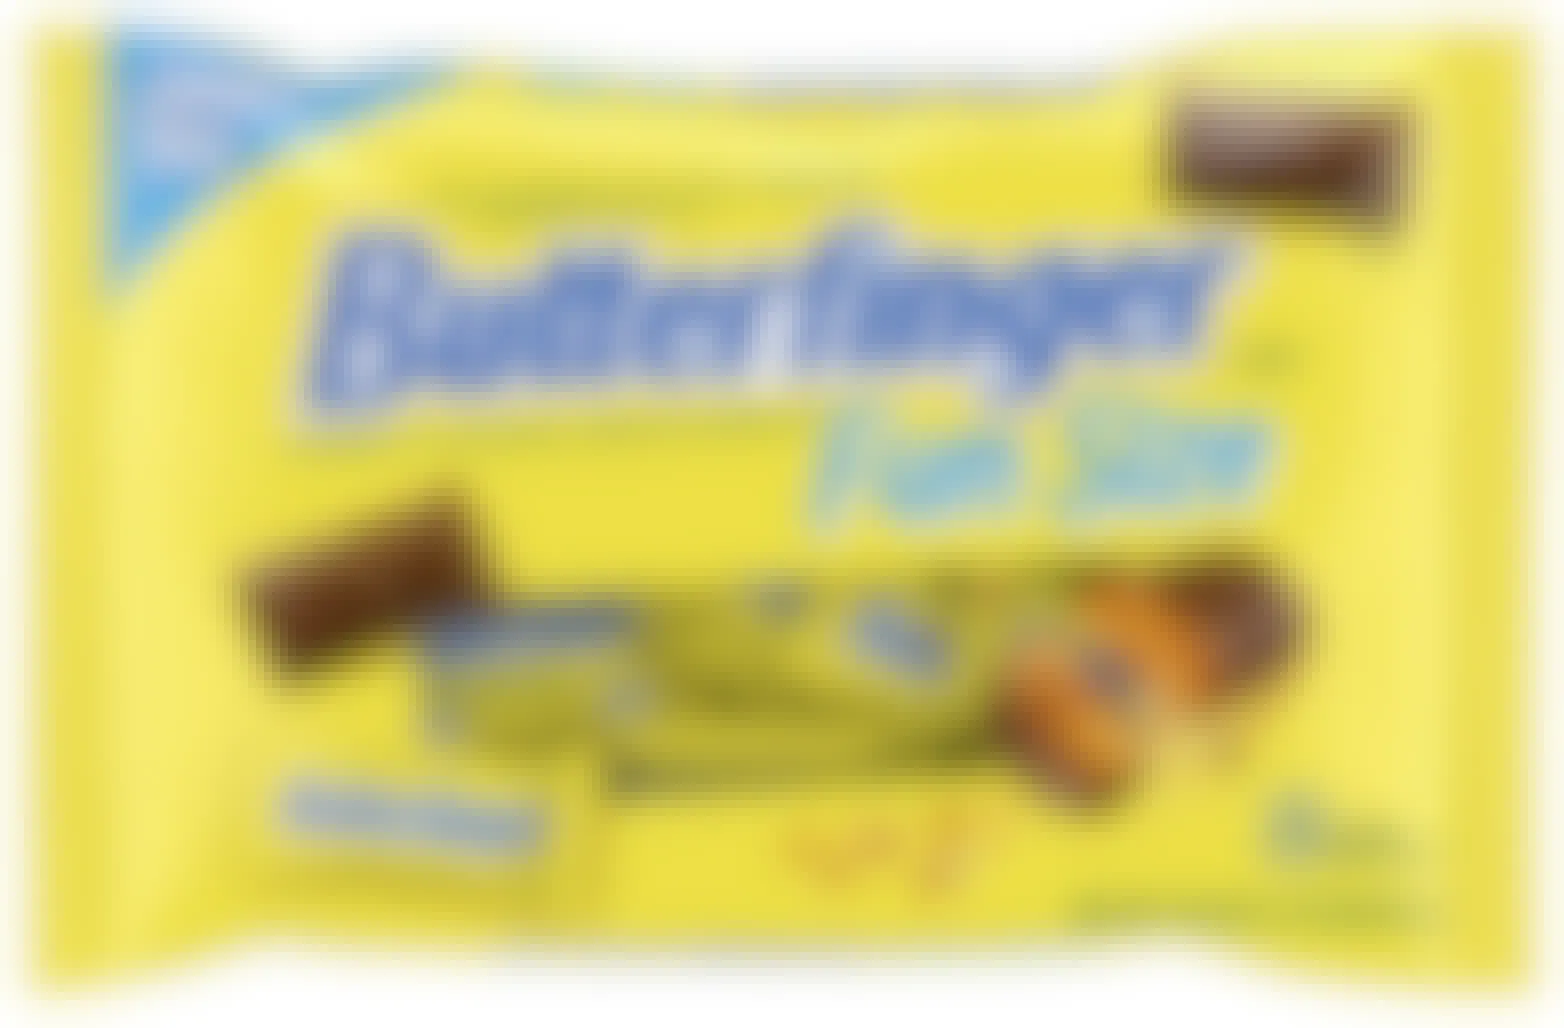 Butterfinger fun size candy bars. 